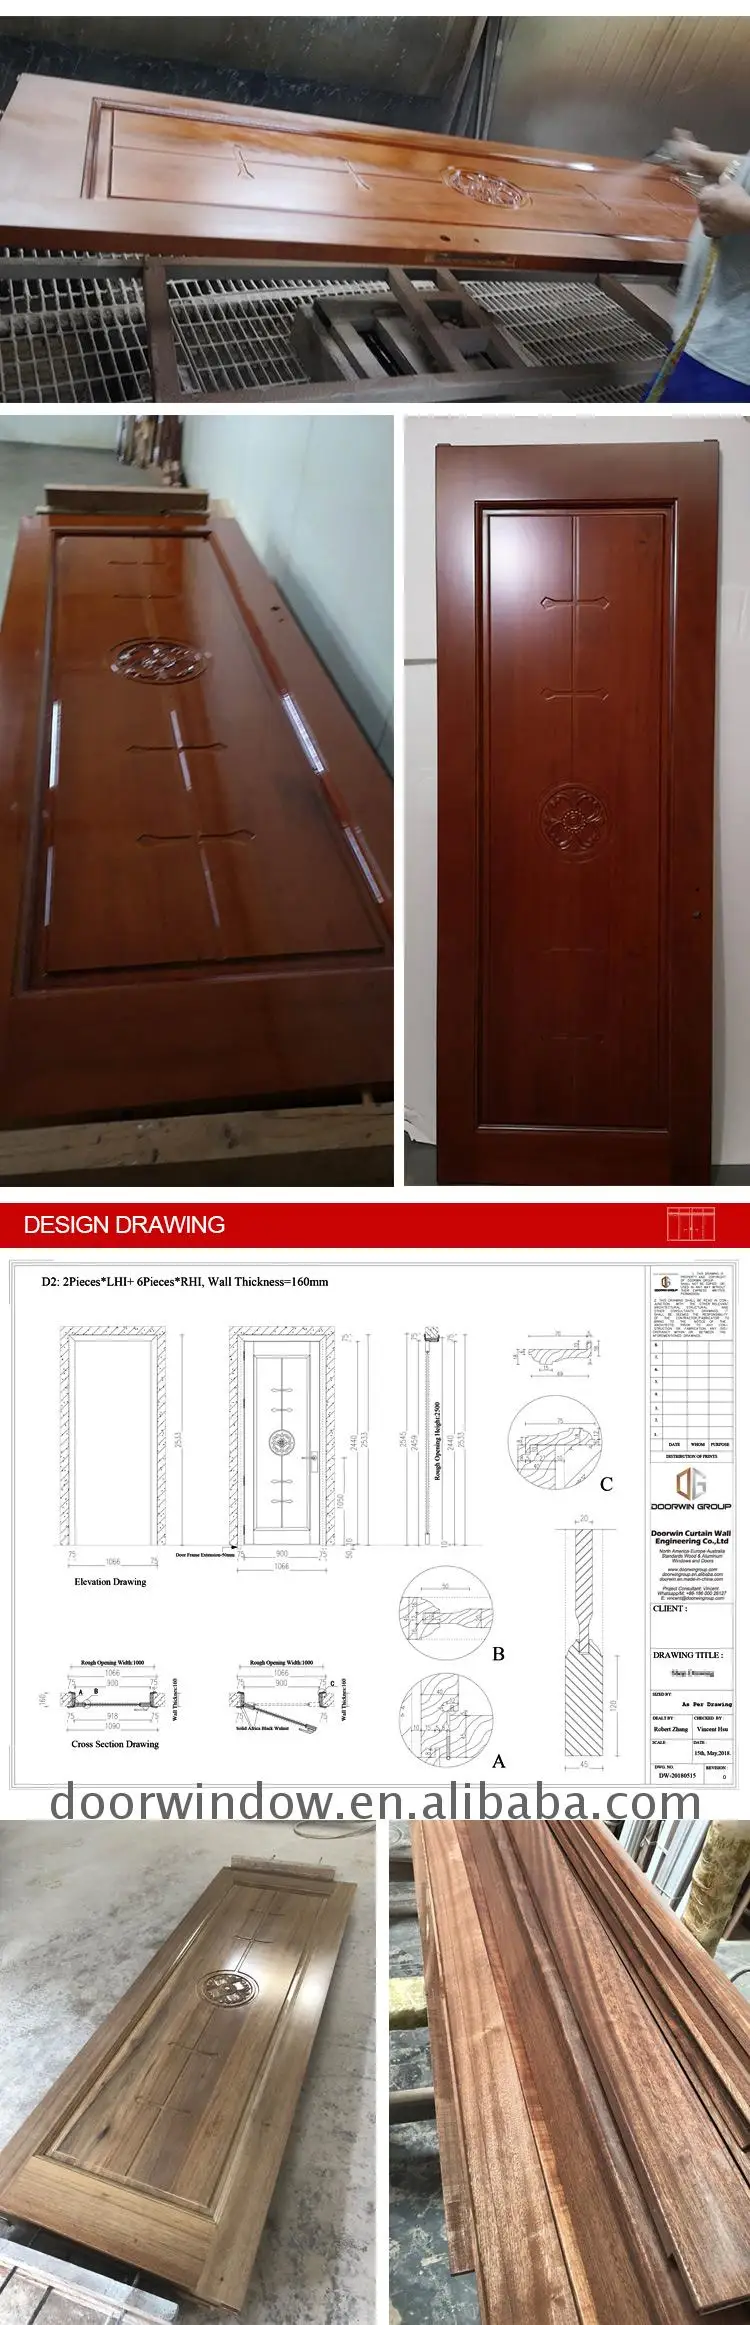 Wooden door with frame decoration glass insert wood interior door glass insert wood interior door